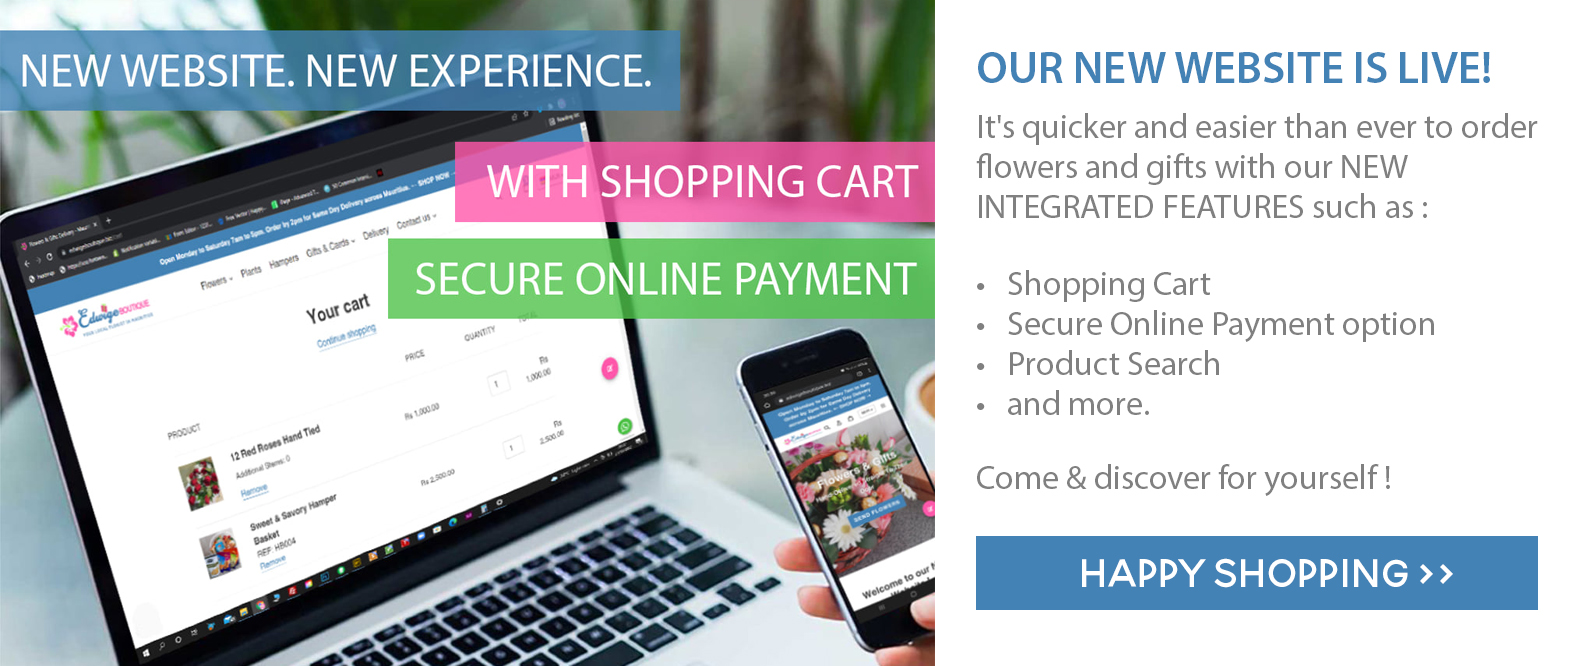 It's quicker and easier than ever to order flowers and gifts with integrated shopping cart and secure online payment.